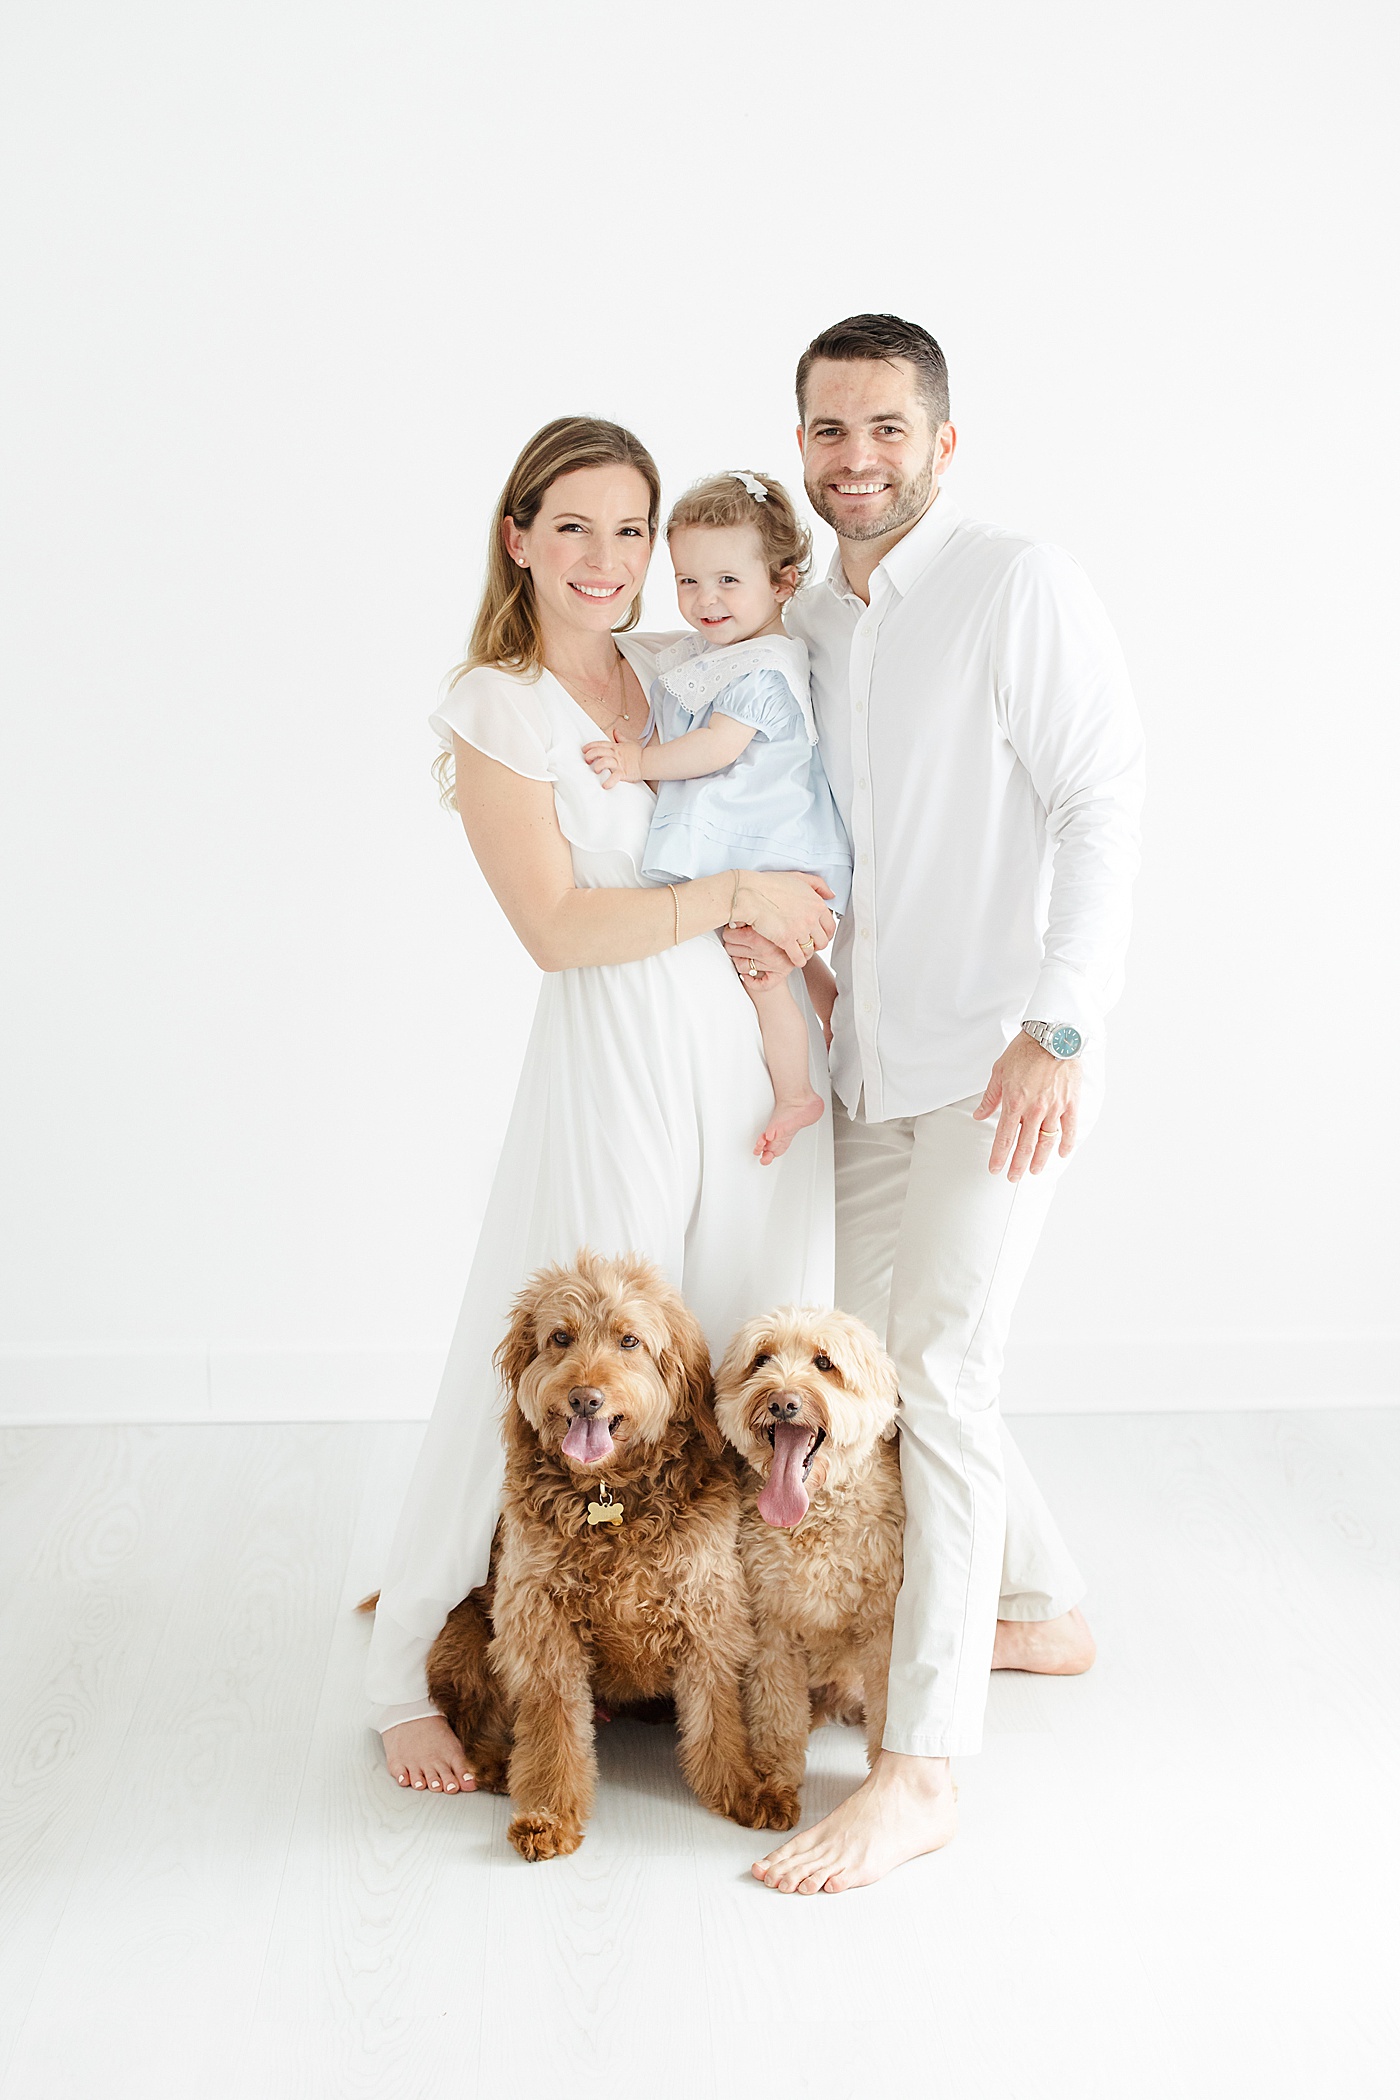 One year old celebrating her first birthday with parents and two family dogs | Kristin Wood Photography